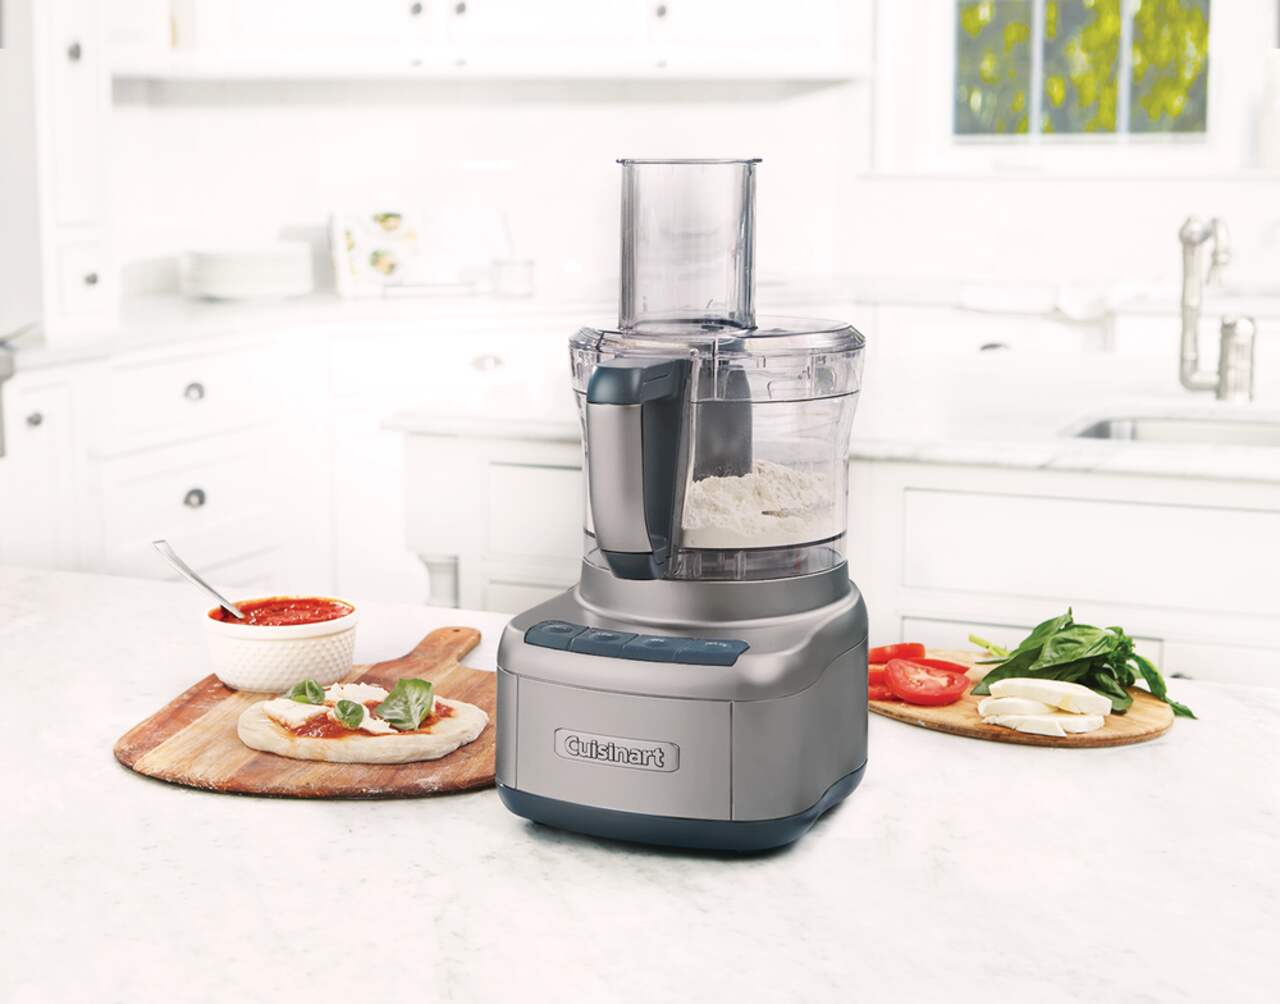 https://media-www.canadiantire.ca/product/living/kitchen/kitchen-appliances/0432612/cuisinart-elemental-8-cup-food-processor-4e637b2b-0d56-44c4-8c84-ccf8e24cffb5.png?imdensity=1&imwidth=1244&impolicy=mZoom